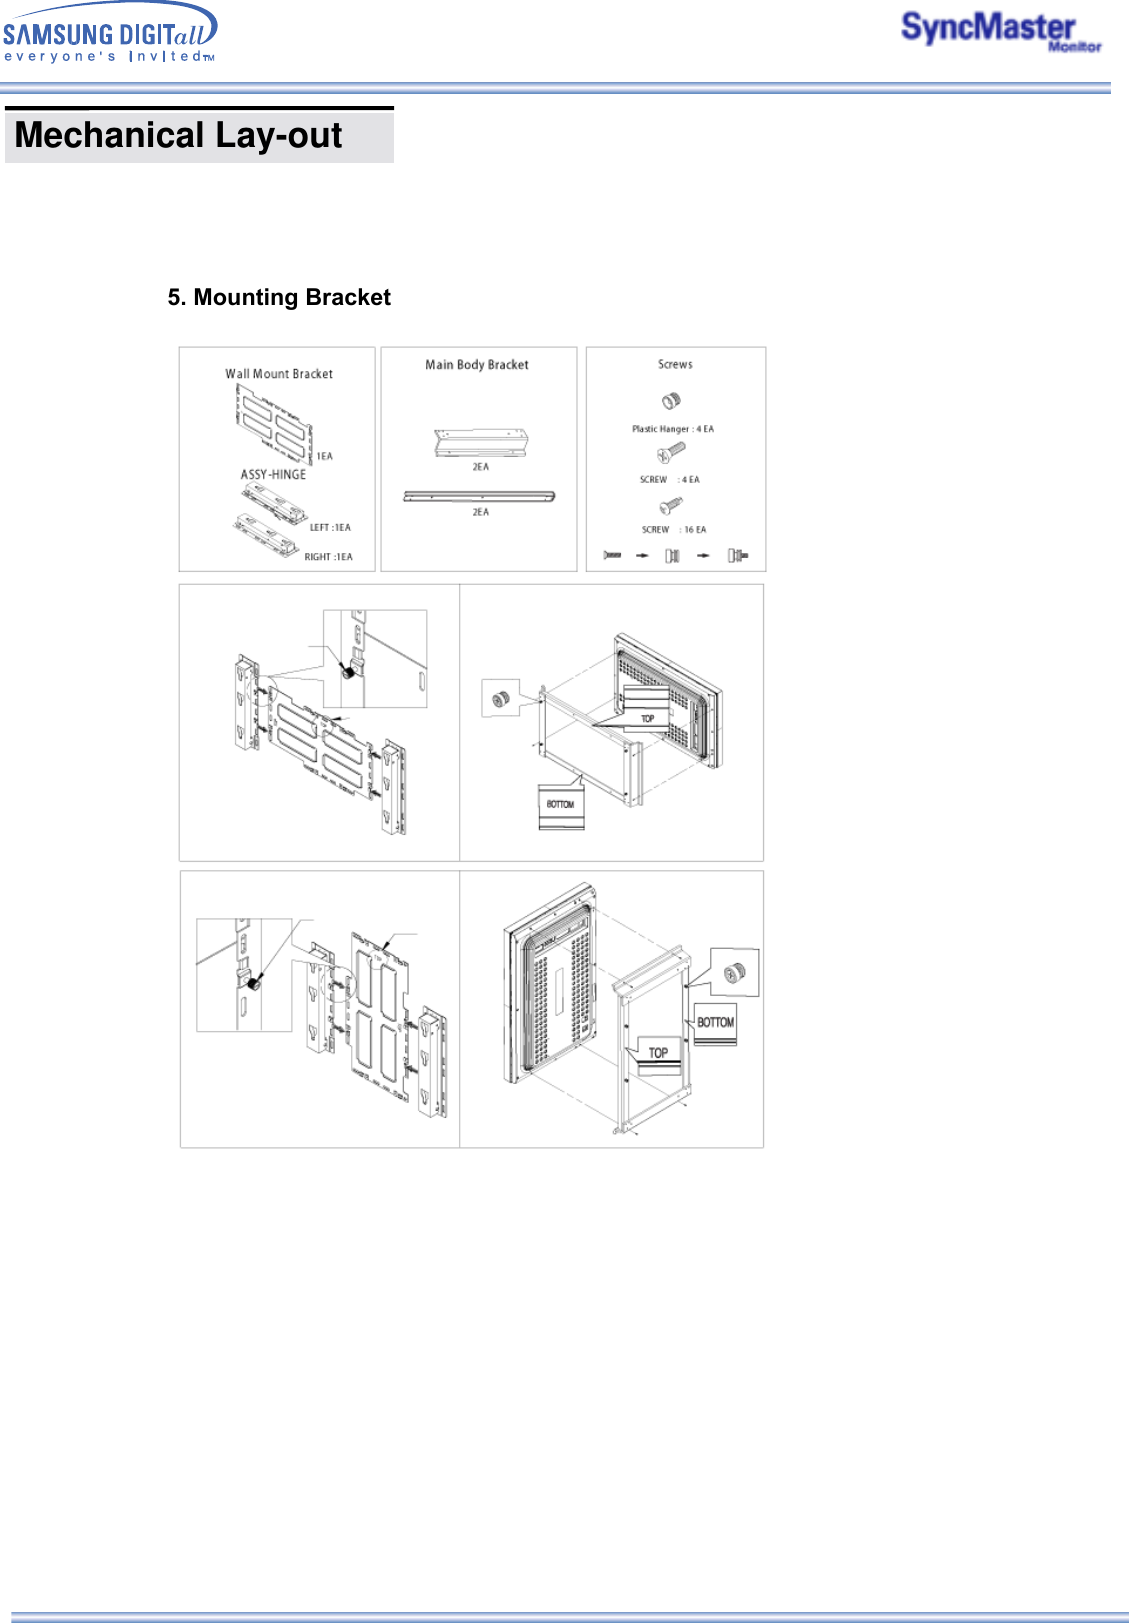 5. Mounting Bracket Mechanical Lay-out